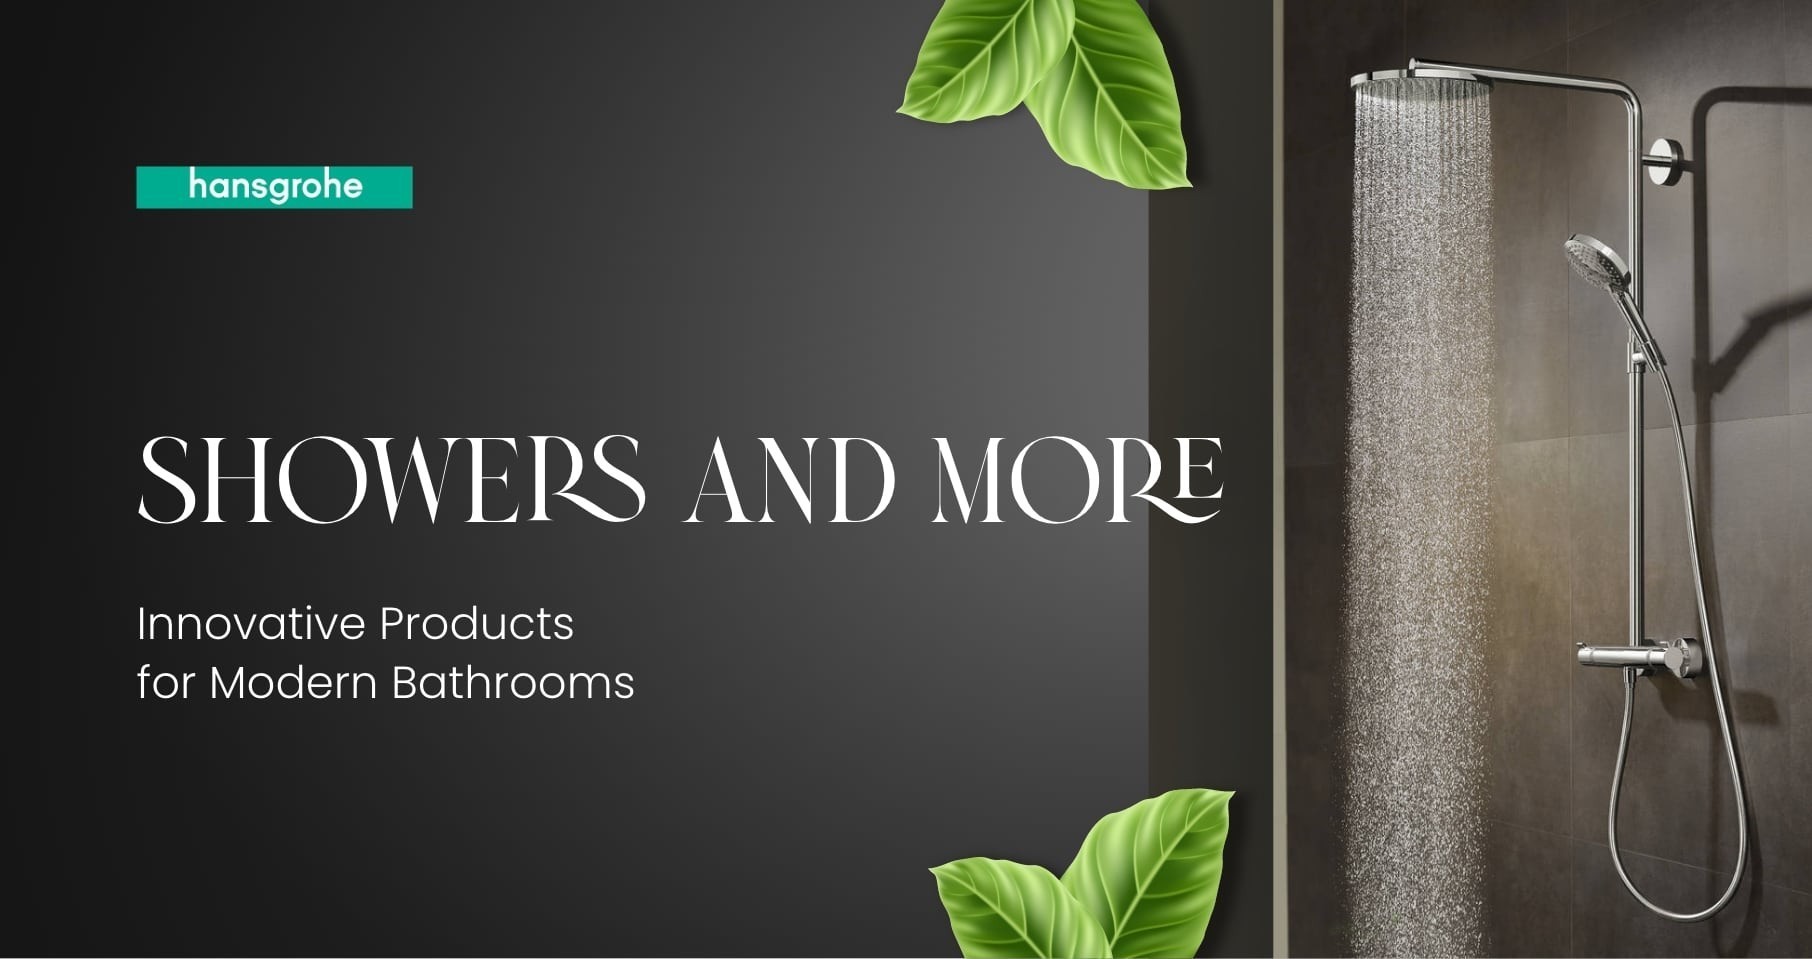 Buy hansgrohe shower head and taps at xTWOstore Ireland